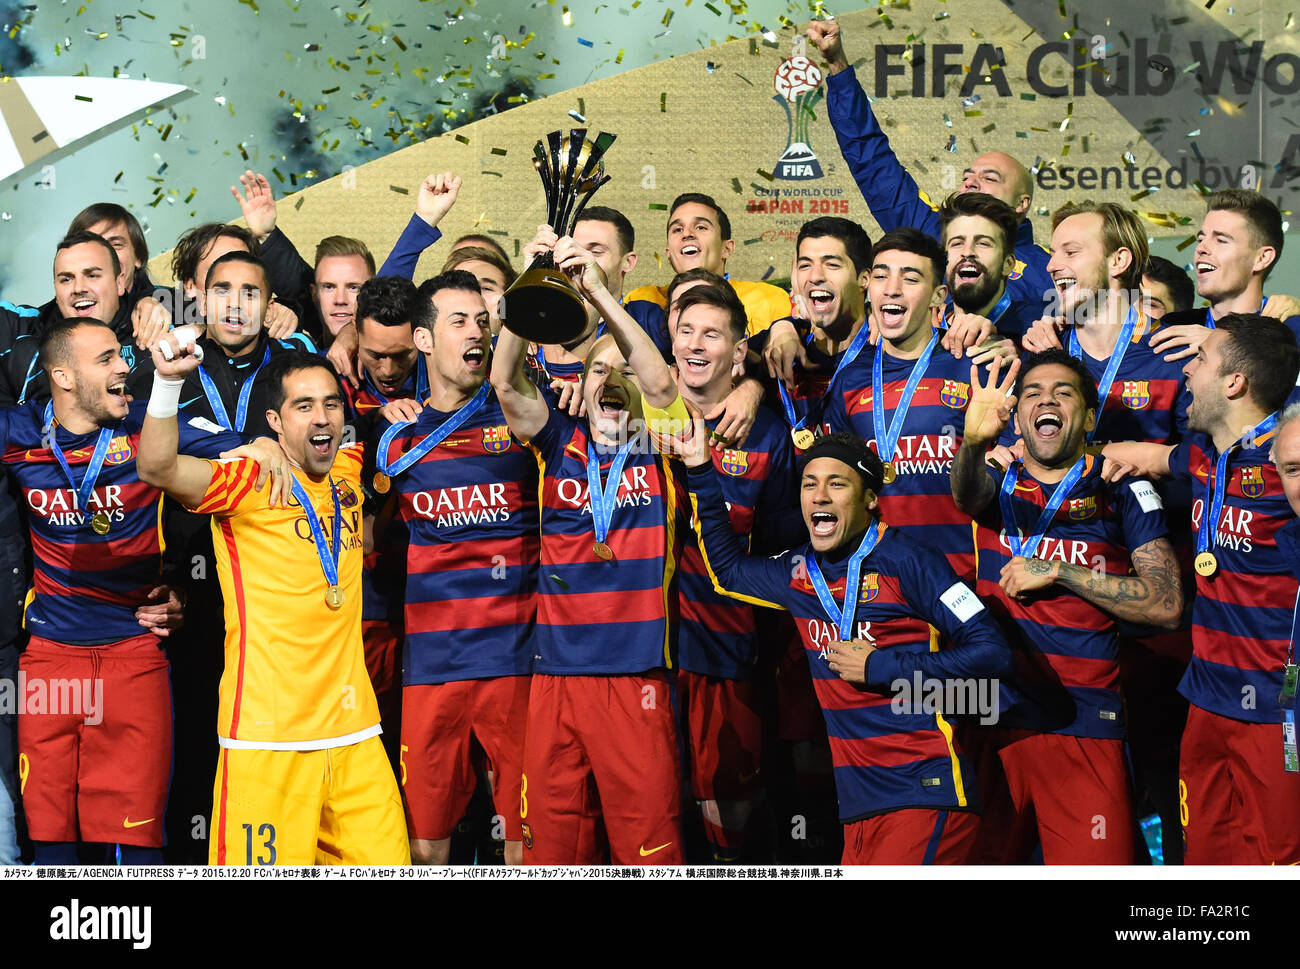 Kanagawa, Japan. 20th Dec, 2015. Barcelona team group Football/Soccer : Andres Iniesta of Barcelona holds up the trophy as he celebrates with his teammates after winning the FIFA Club World Cup Japan 2015 Final match between River Plate 0-3 FC Barcelona at International Stadium Yokohama in Kanagawa, Japan . Credit:  Takamoto Tokuhara/AFLO/Alamy Live News Stock Photo